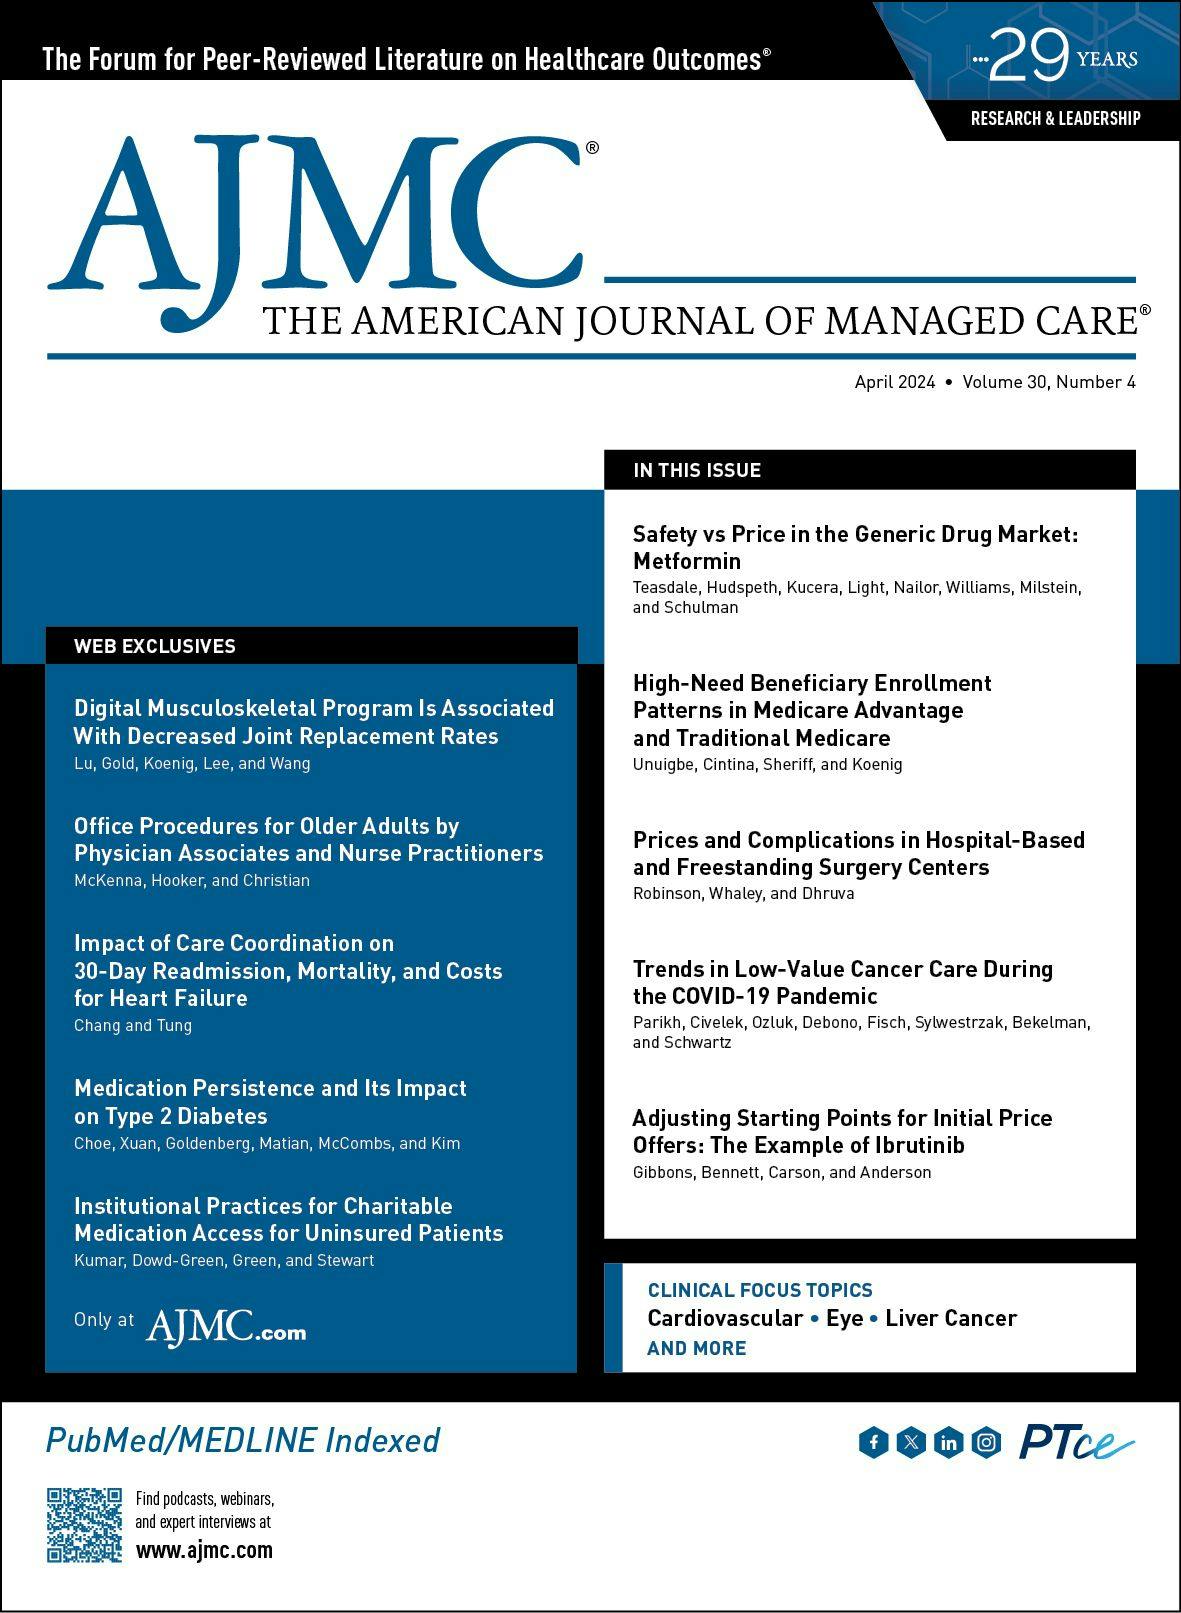 The American Journal of Managed Care April 2024 Issue